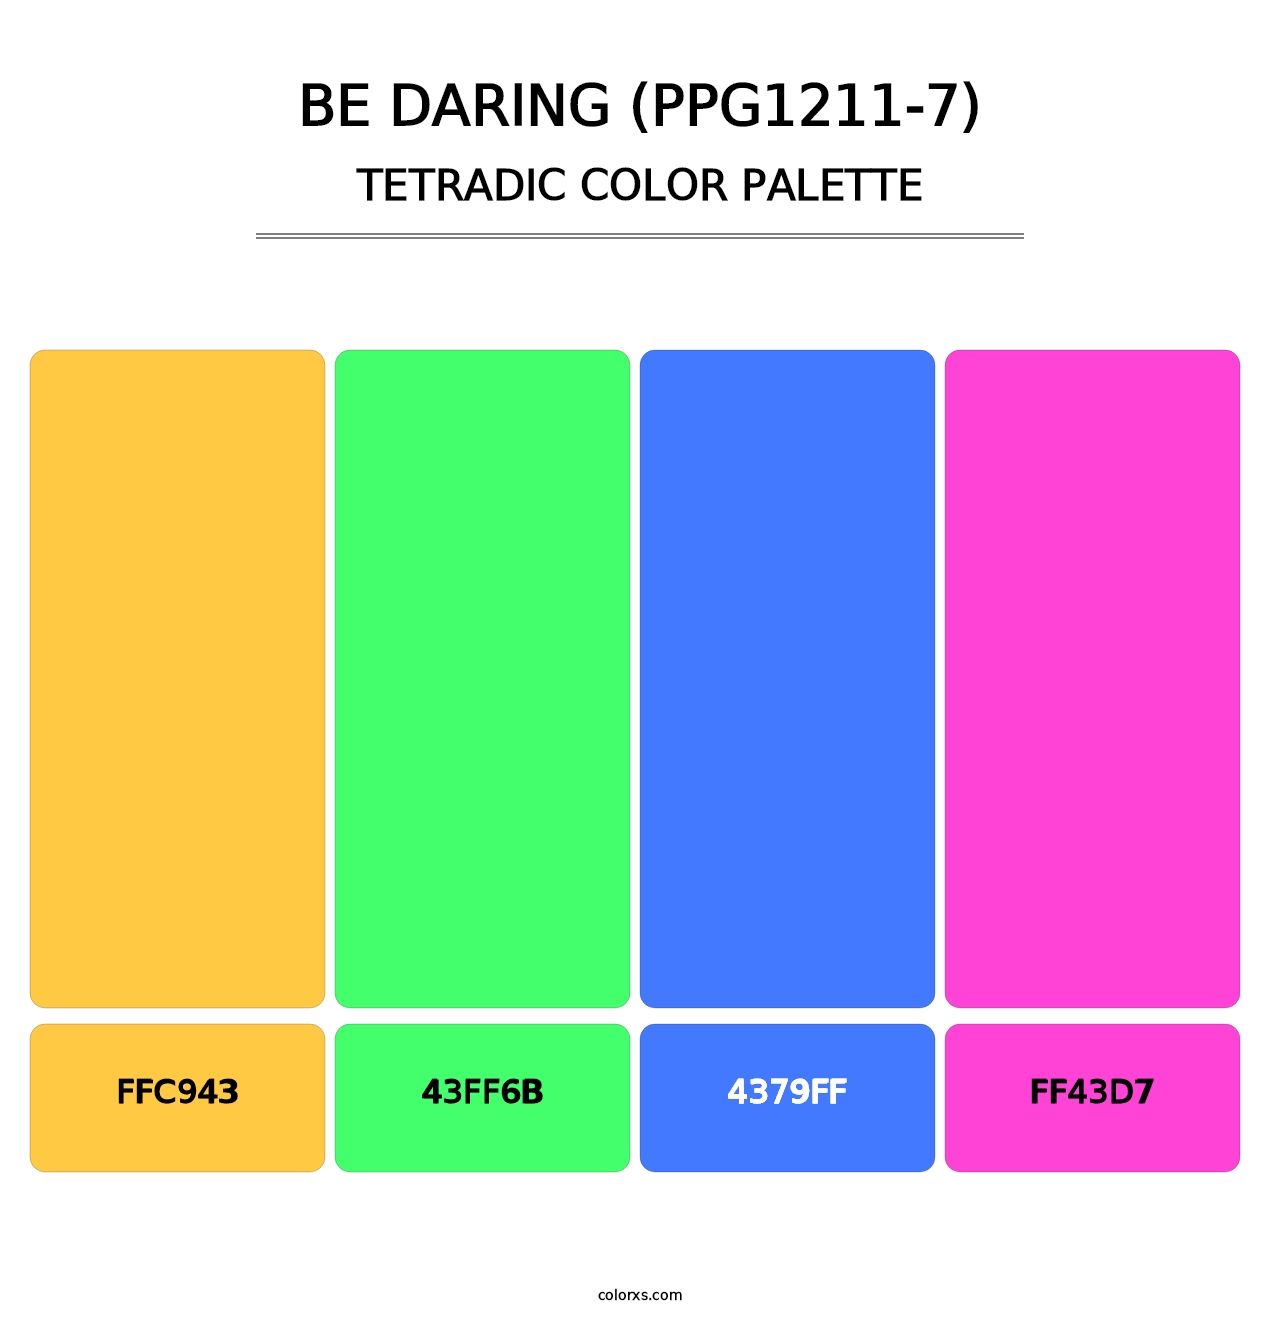 Be Daring (PPG1211-7) - Tetradic Color Palette